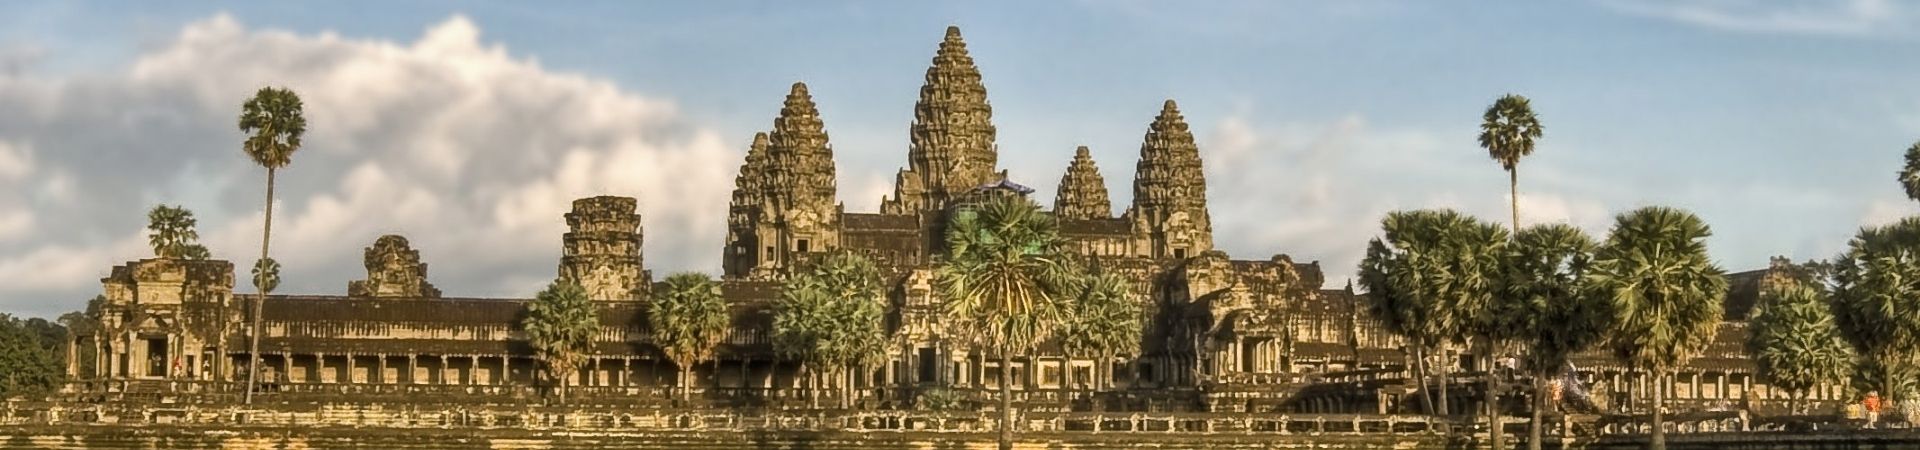 Image of Angkor Wat with ‘60s Style & Sophistication